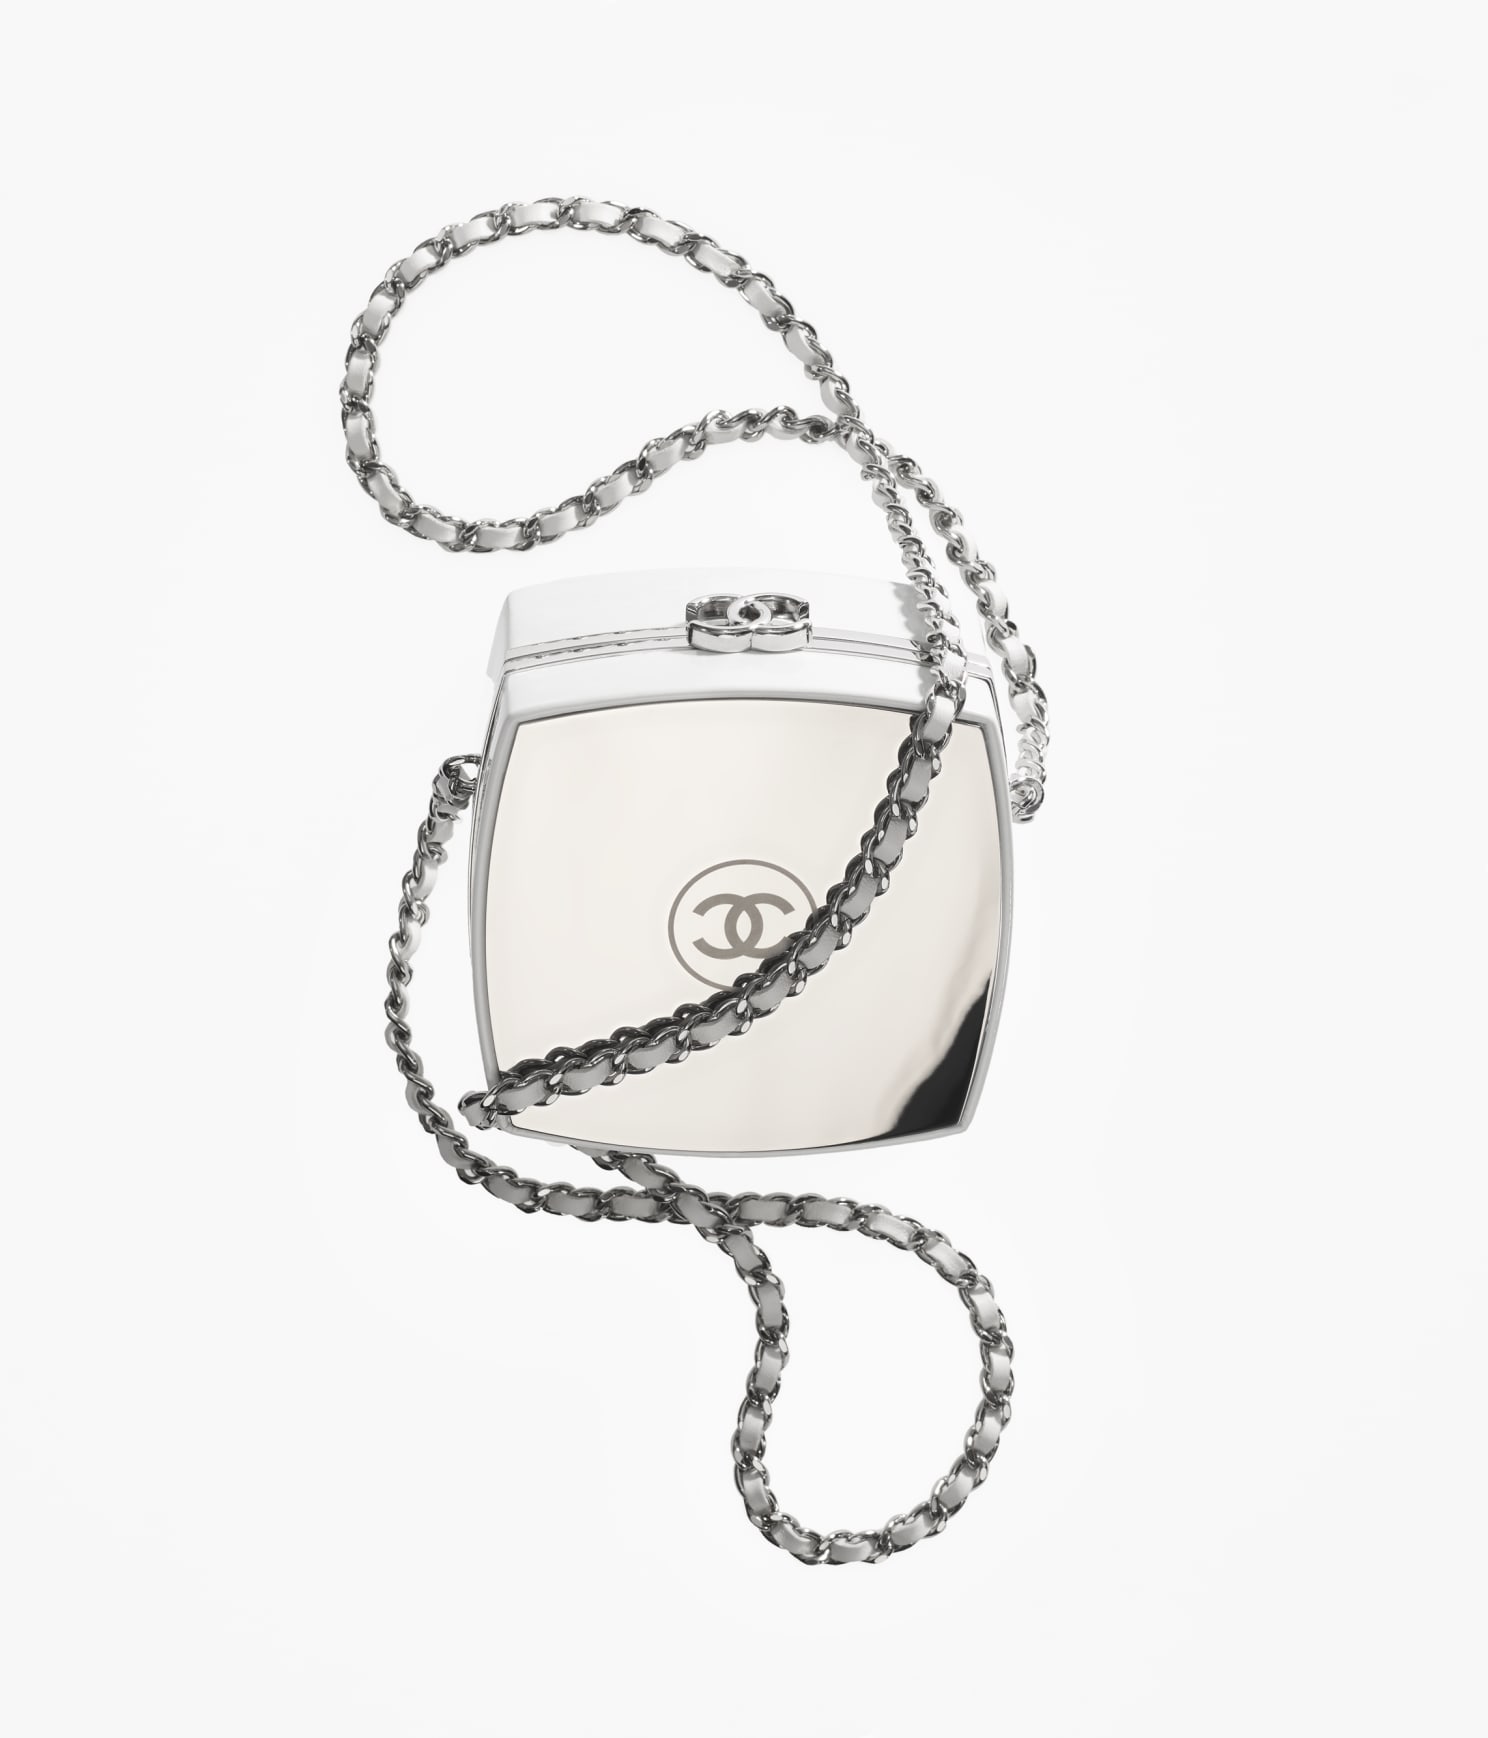 Chanel's Newest Clutch with Chain is Too Dreamy to Pass Up